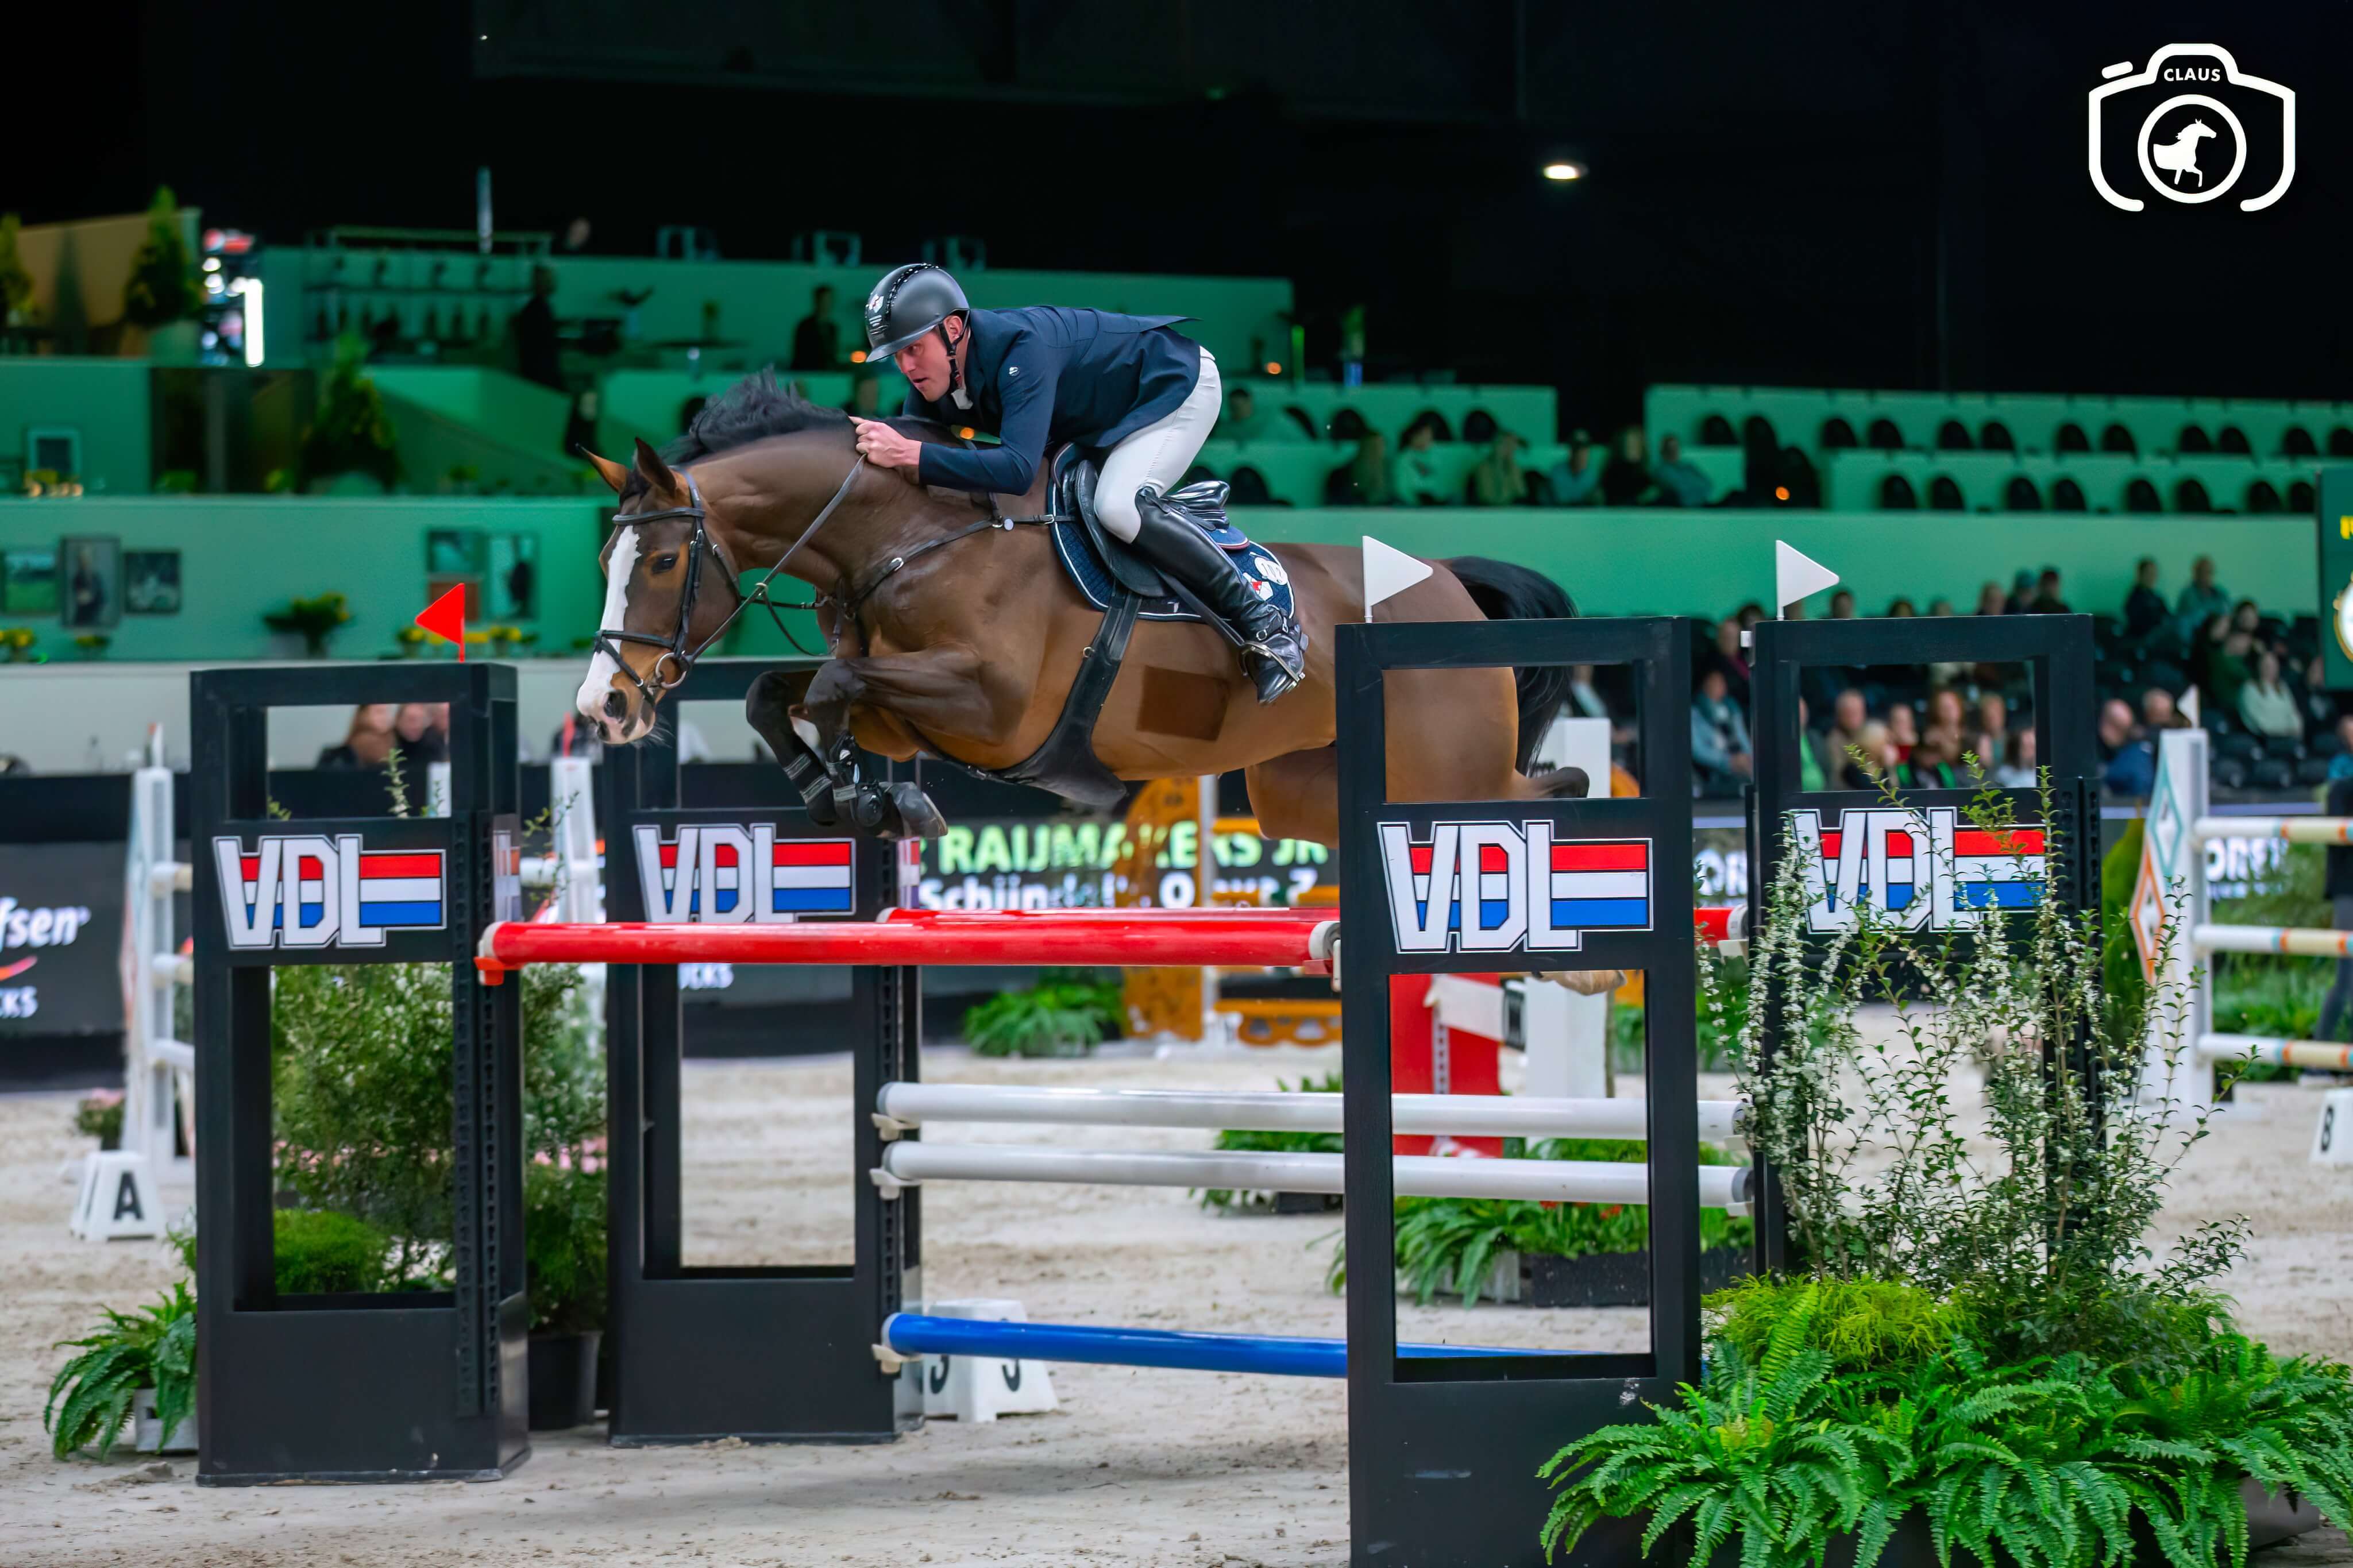 Piet Raijmakers Jr. makes it a home win in the CSI5* The Dutch Masters opening class